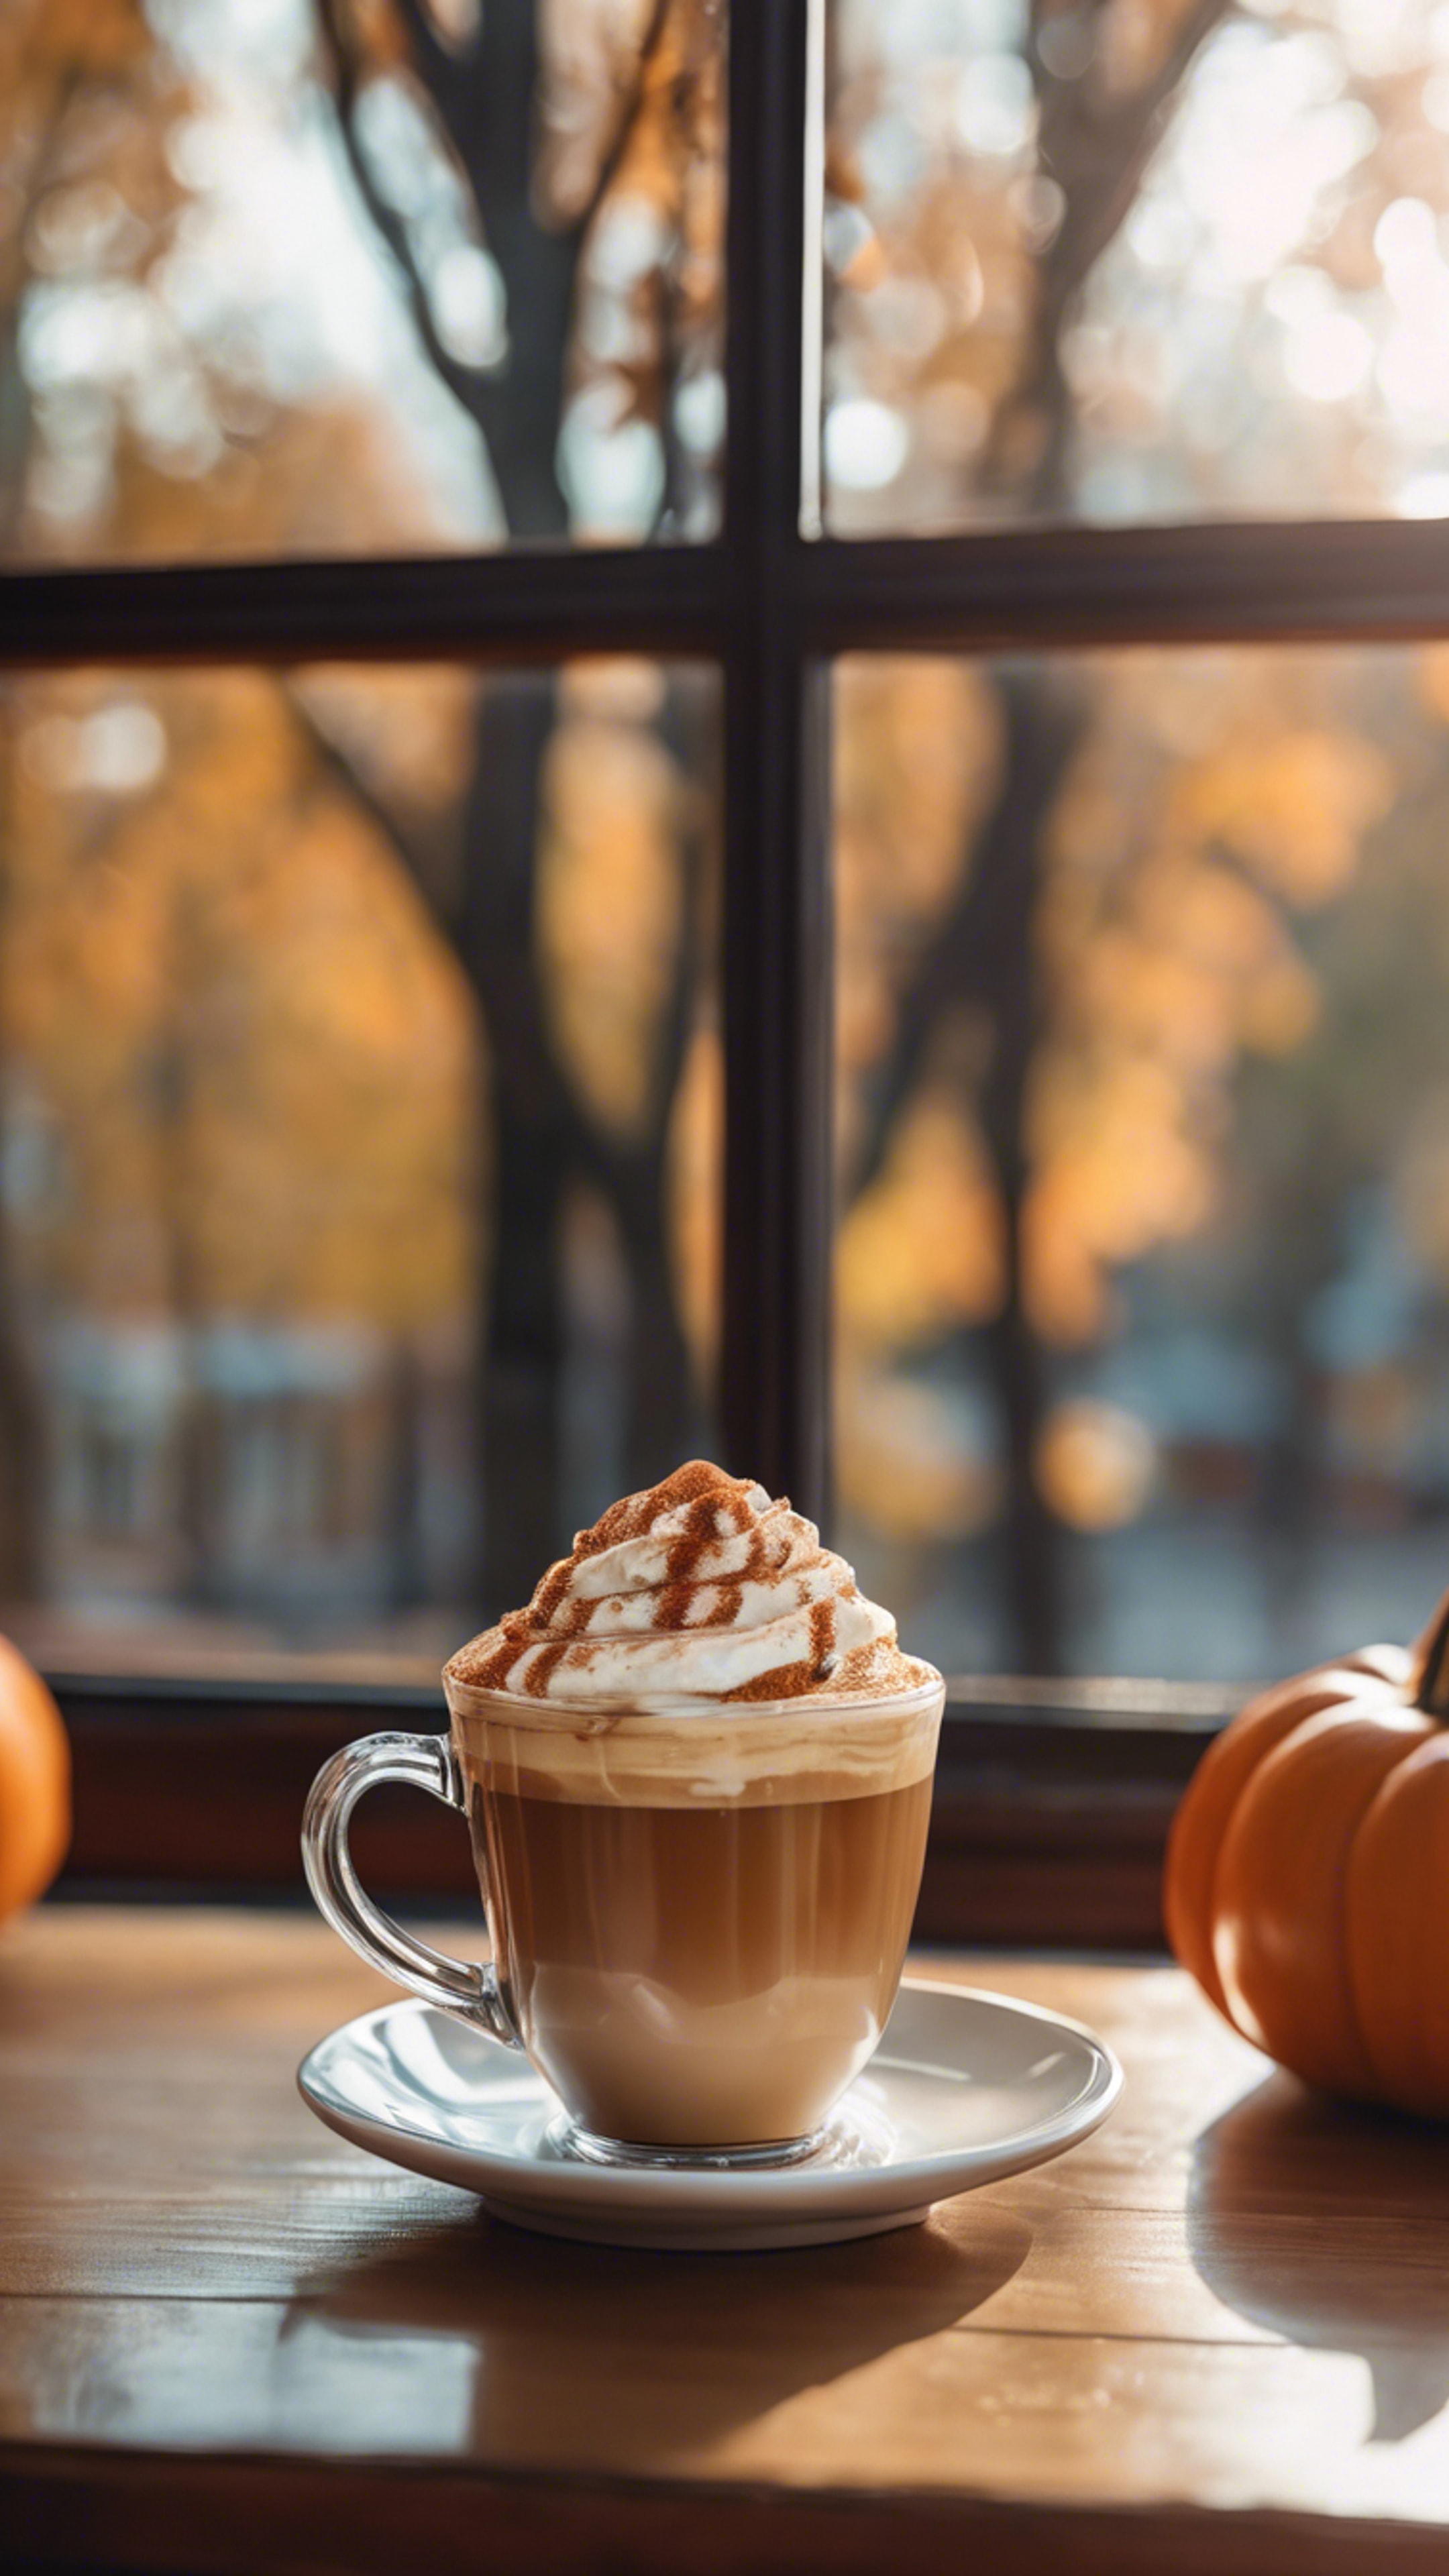 A cinnamon scented, aesthetically decorated pumpkin spice latte on a café table beside a window showing fall trees. Wallpaper[744c595cd79c47deb68d]